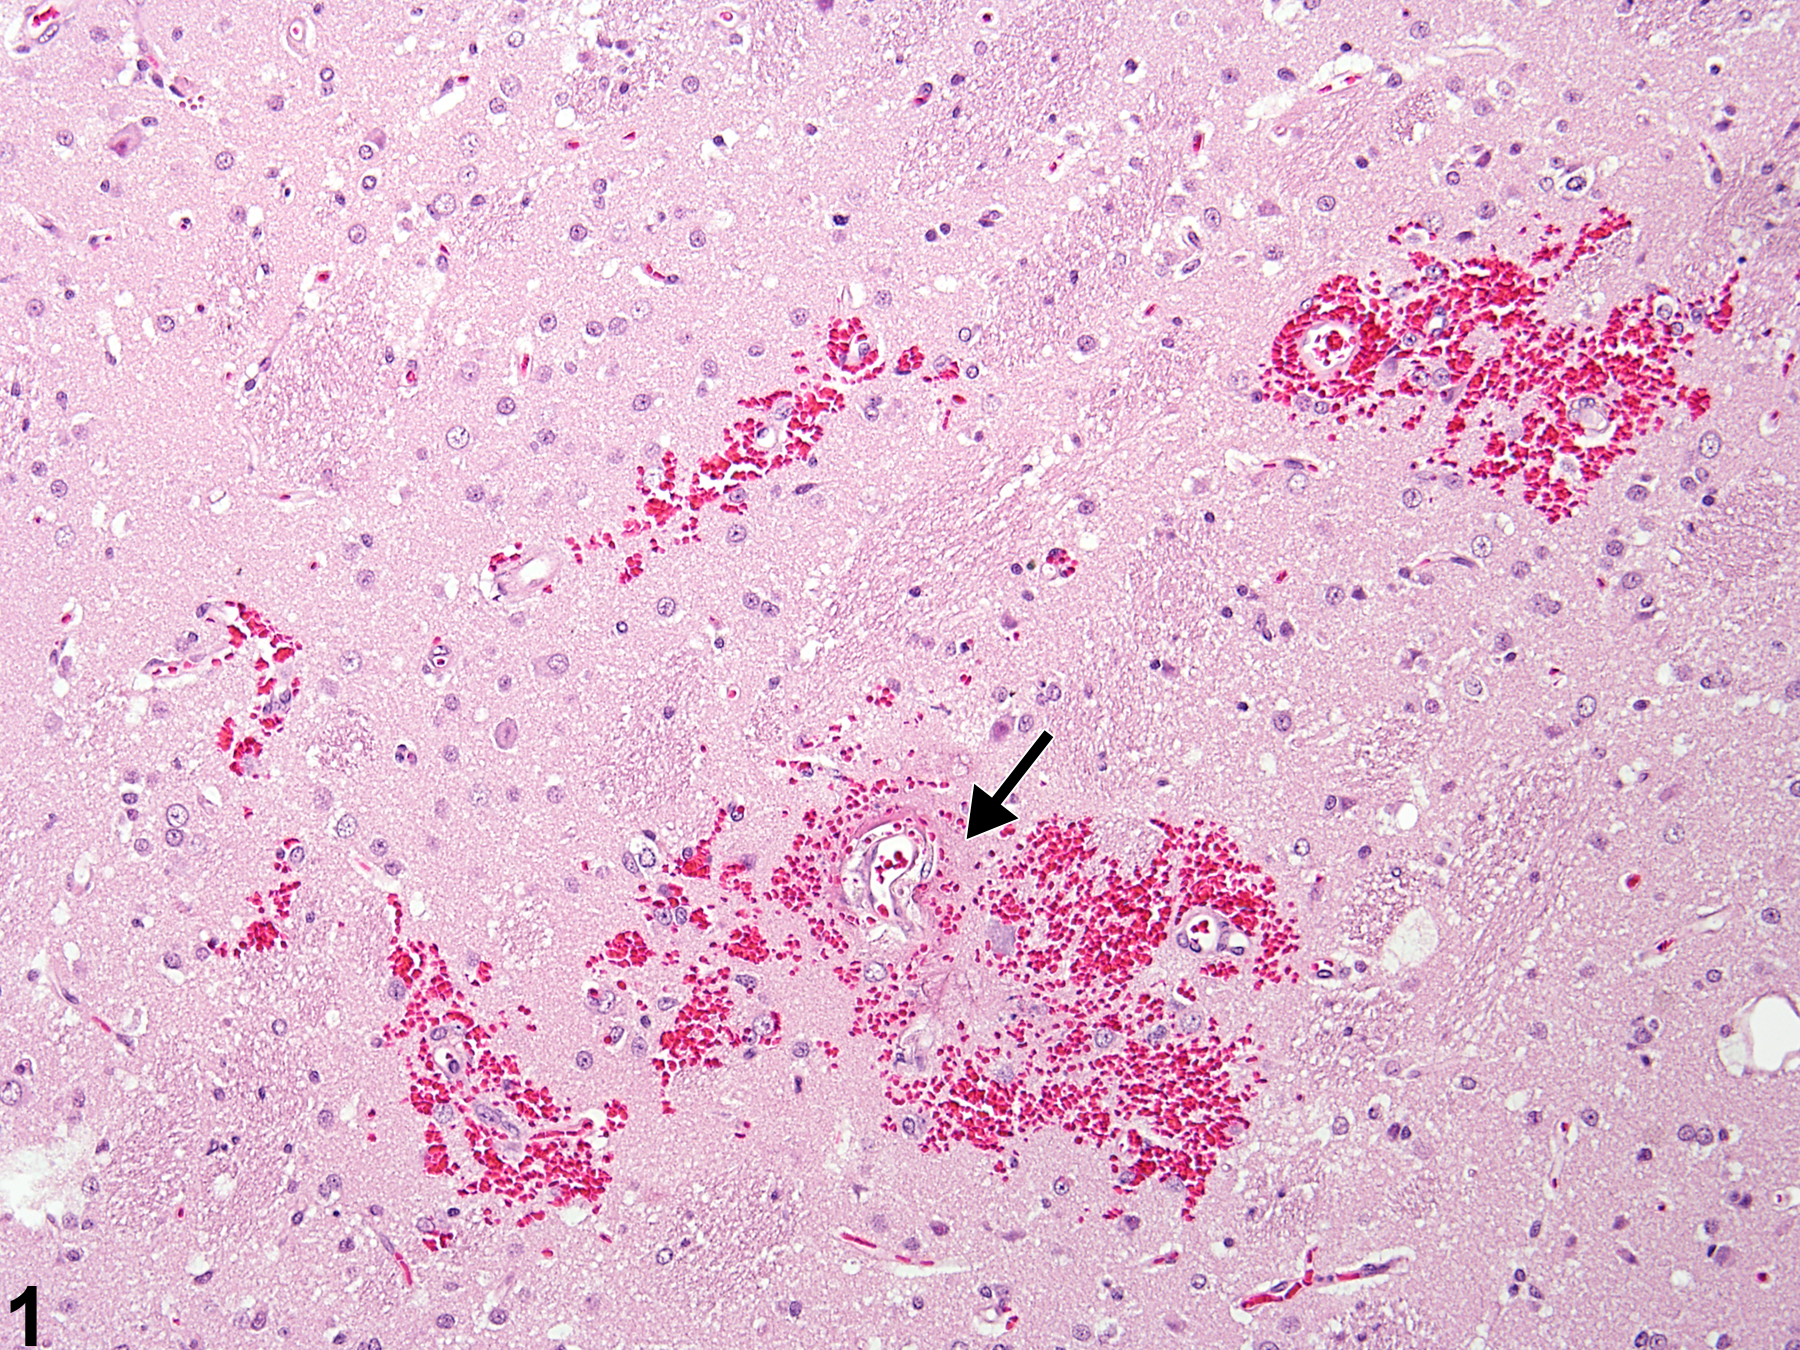 Image of hemorrhage in the brain from a male F344/N rat in a chronic study